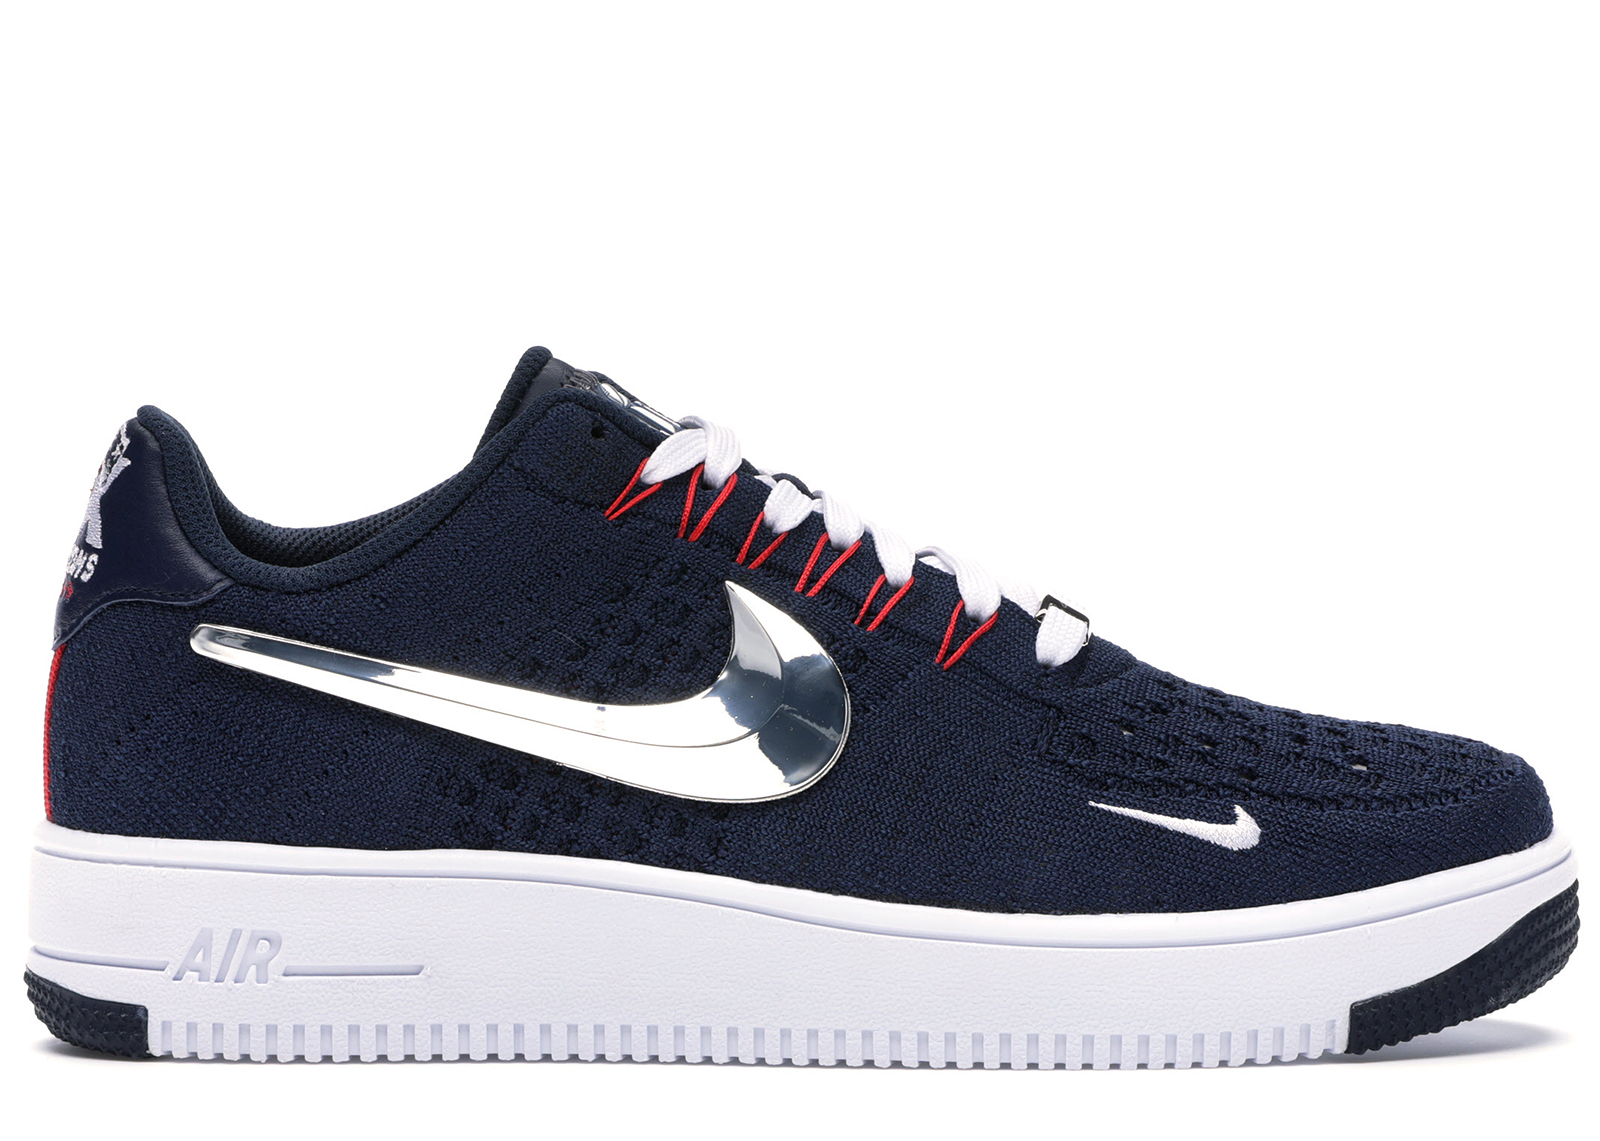 Nike Air Force 1 Ultra Flyknit Patriots 6X Champs College Navy